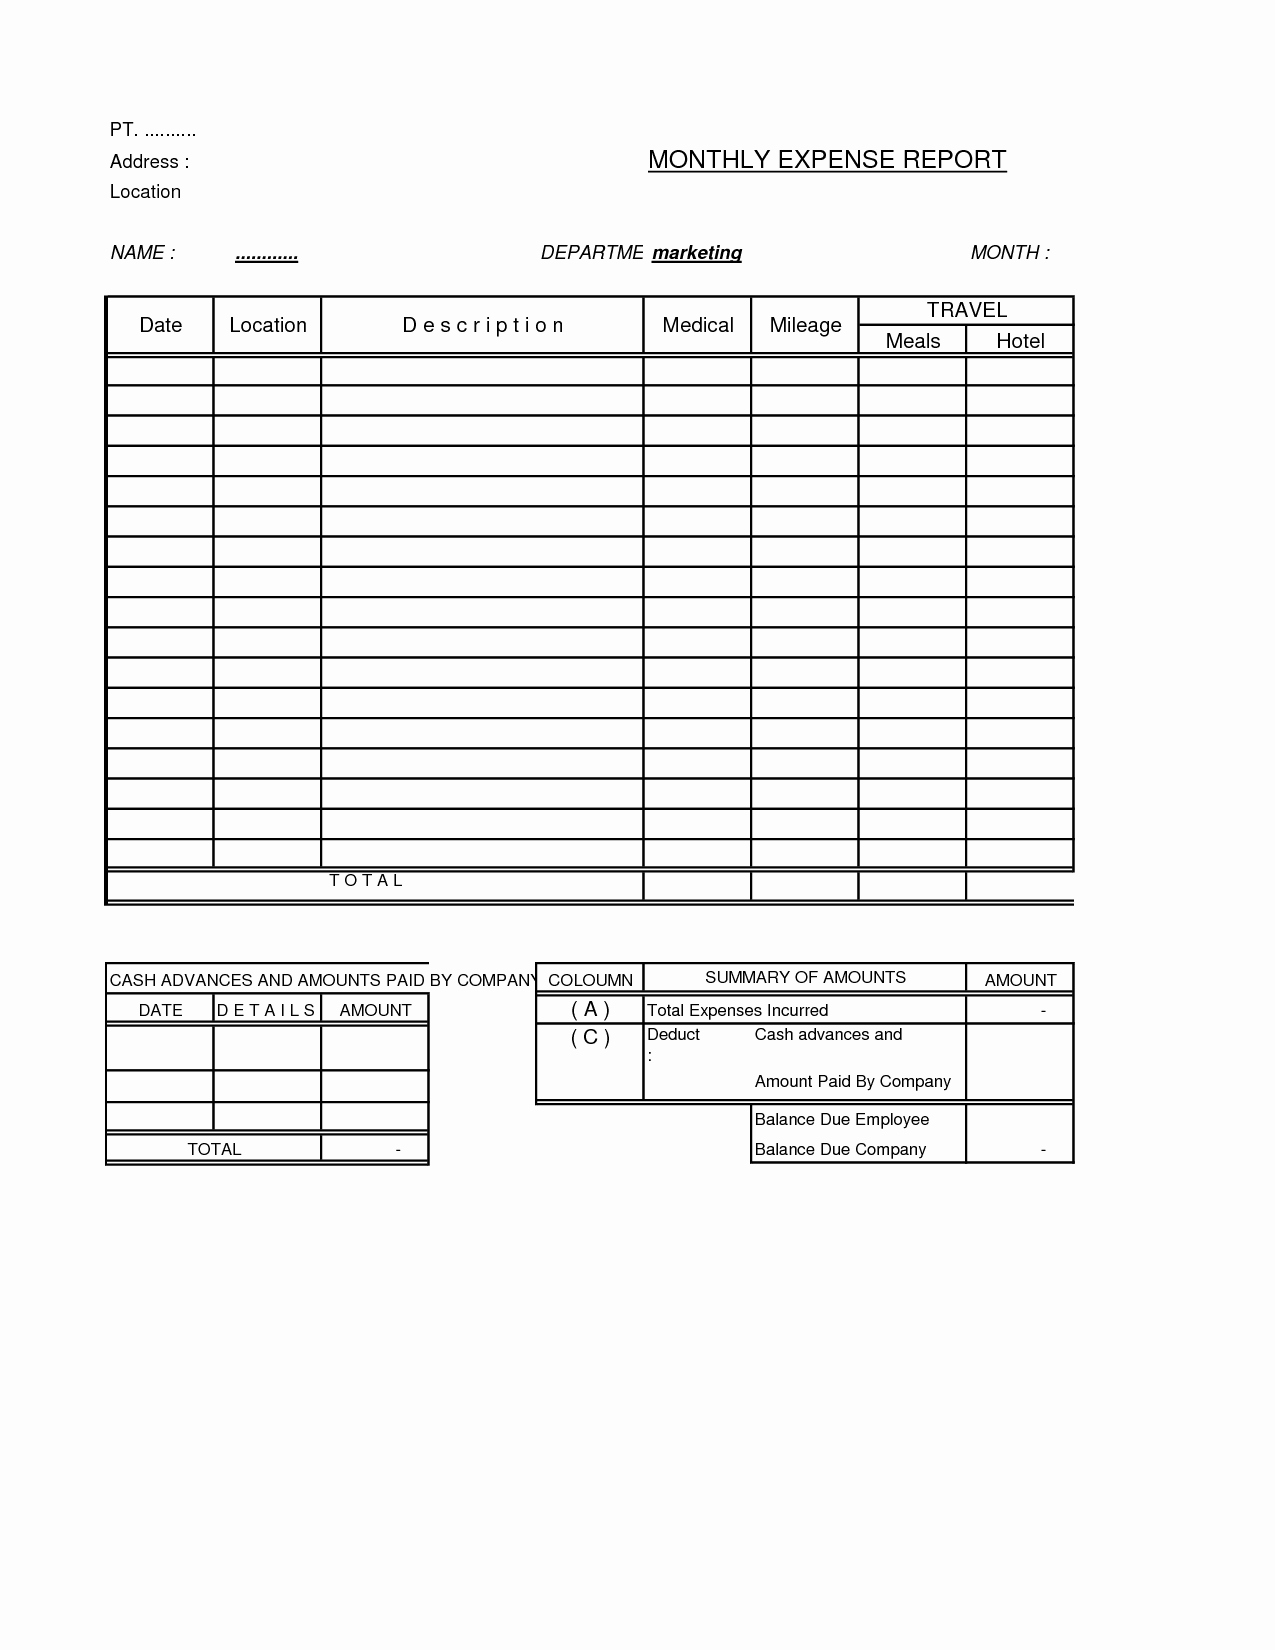 Free Expense Report Template Unique Free Expense Report form Sample to Track Pany Expenses